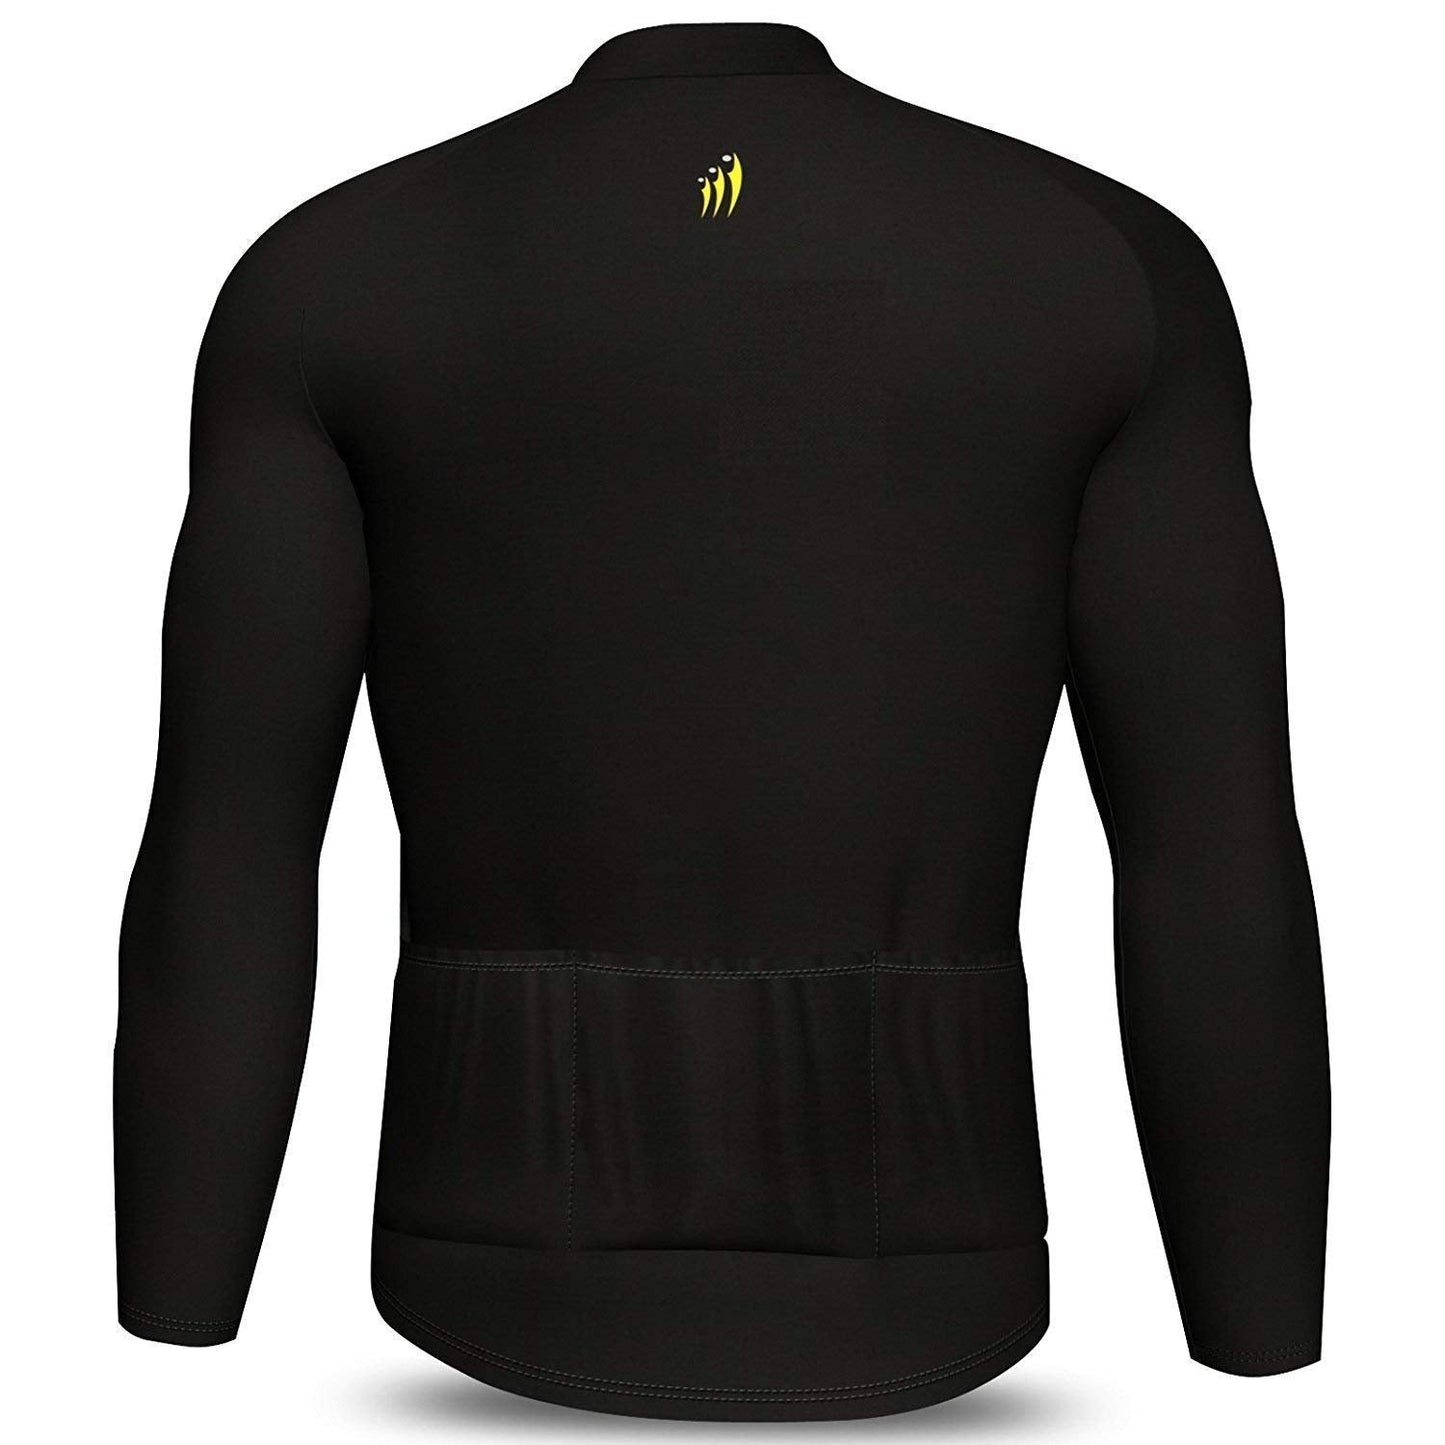 DiDOO Men’s Classic Winter long sleeve thermal cycling jersey